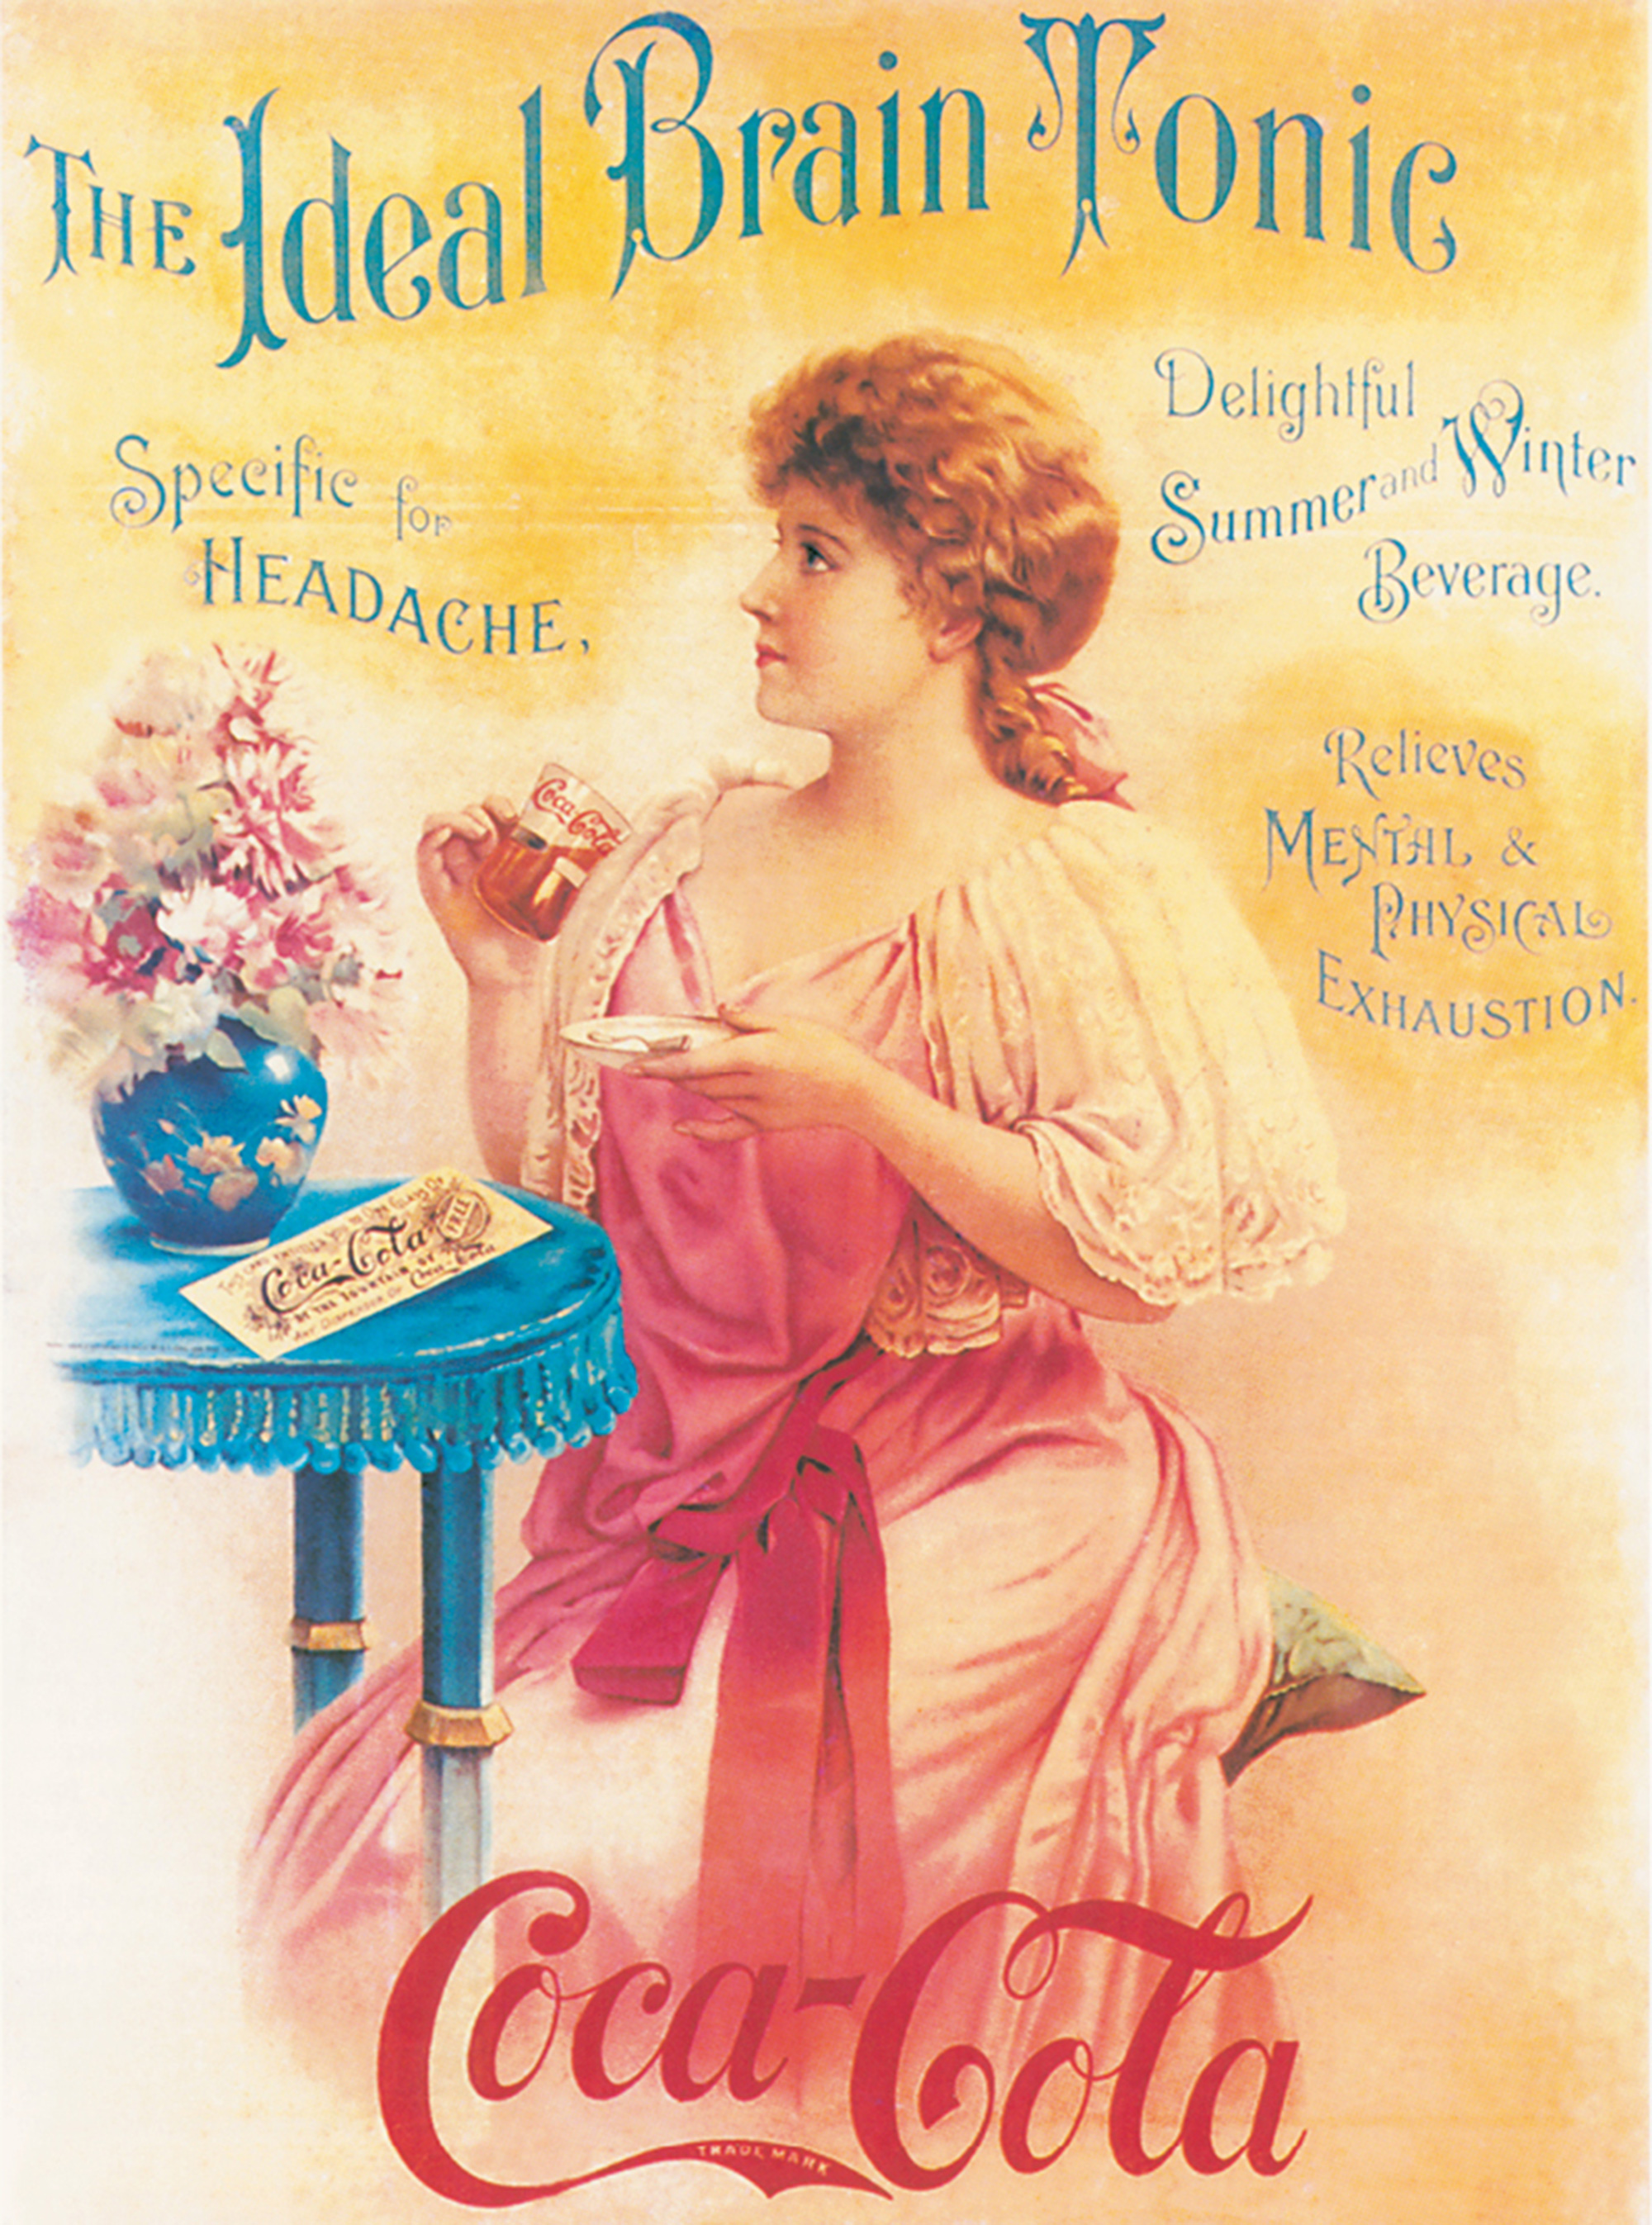 A Coca-Cola calendar advertisement promoting the drink as the “Ideal Brain Tonic,” eighteen ninety seven.